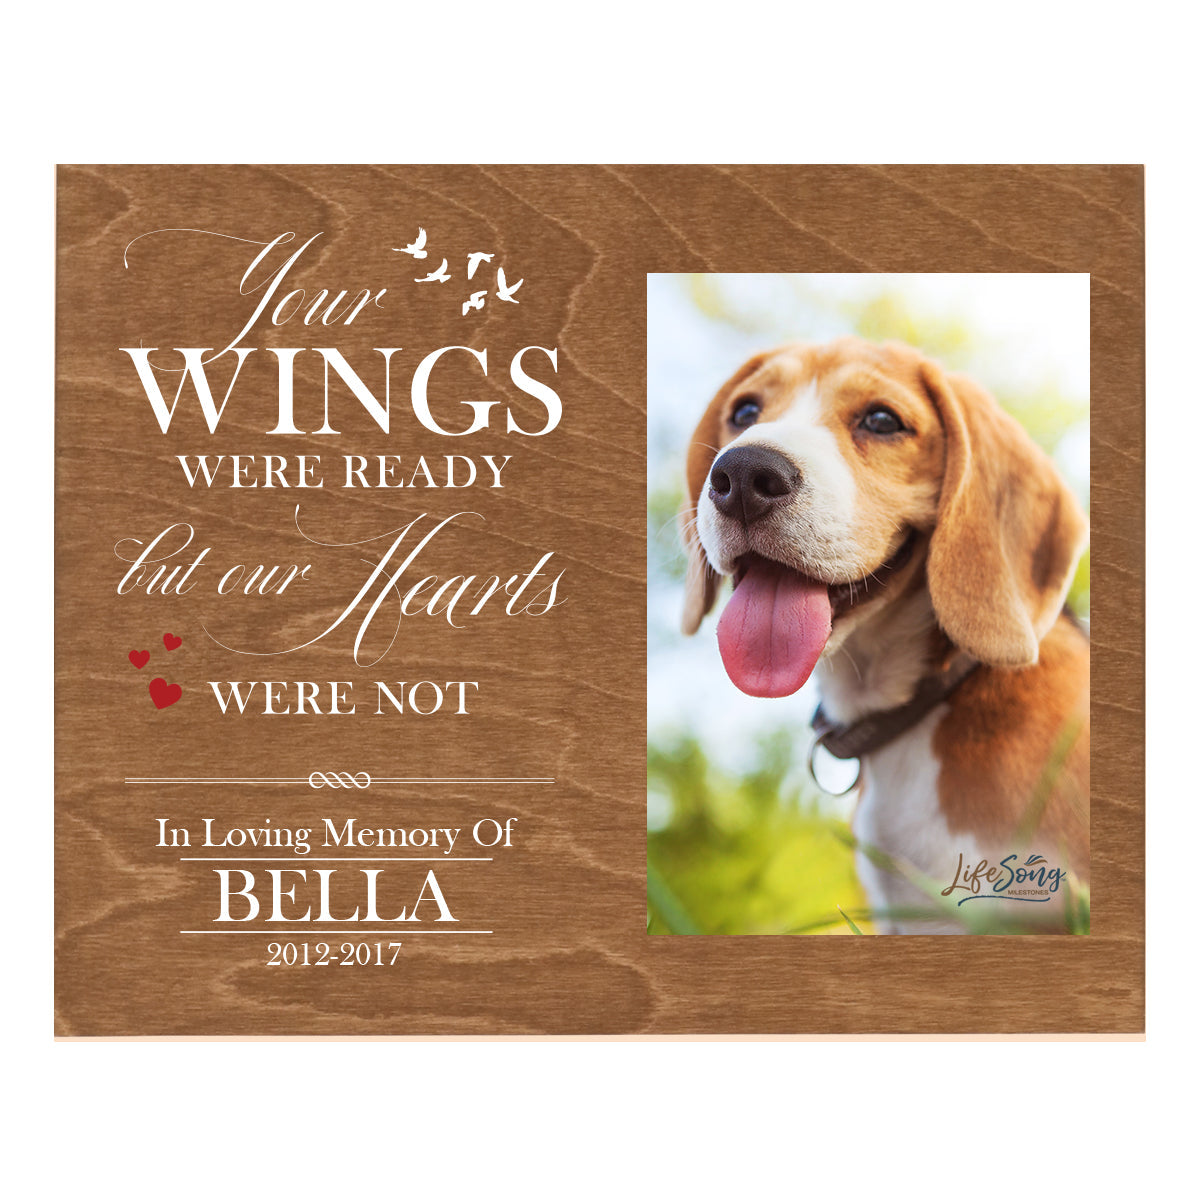 Pet Memorial Photo Wall Plaque Décor - Your Wings Were Ready